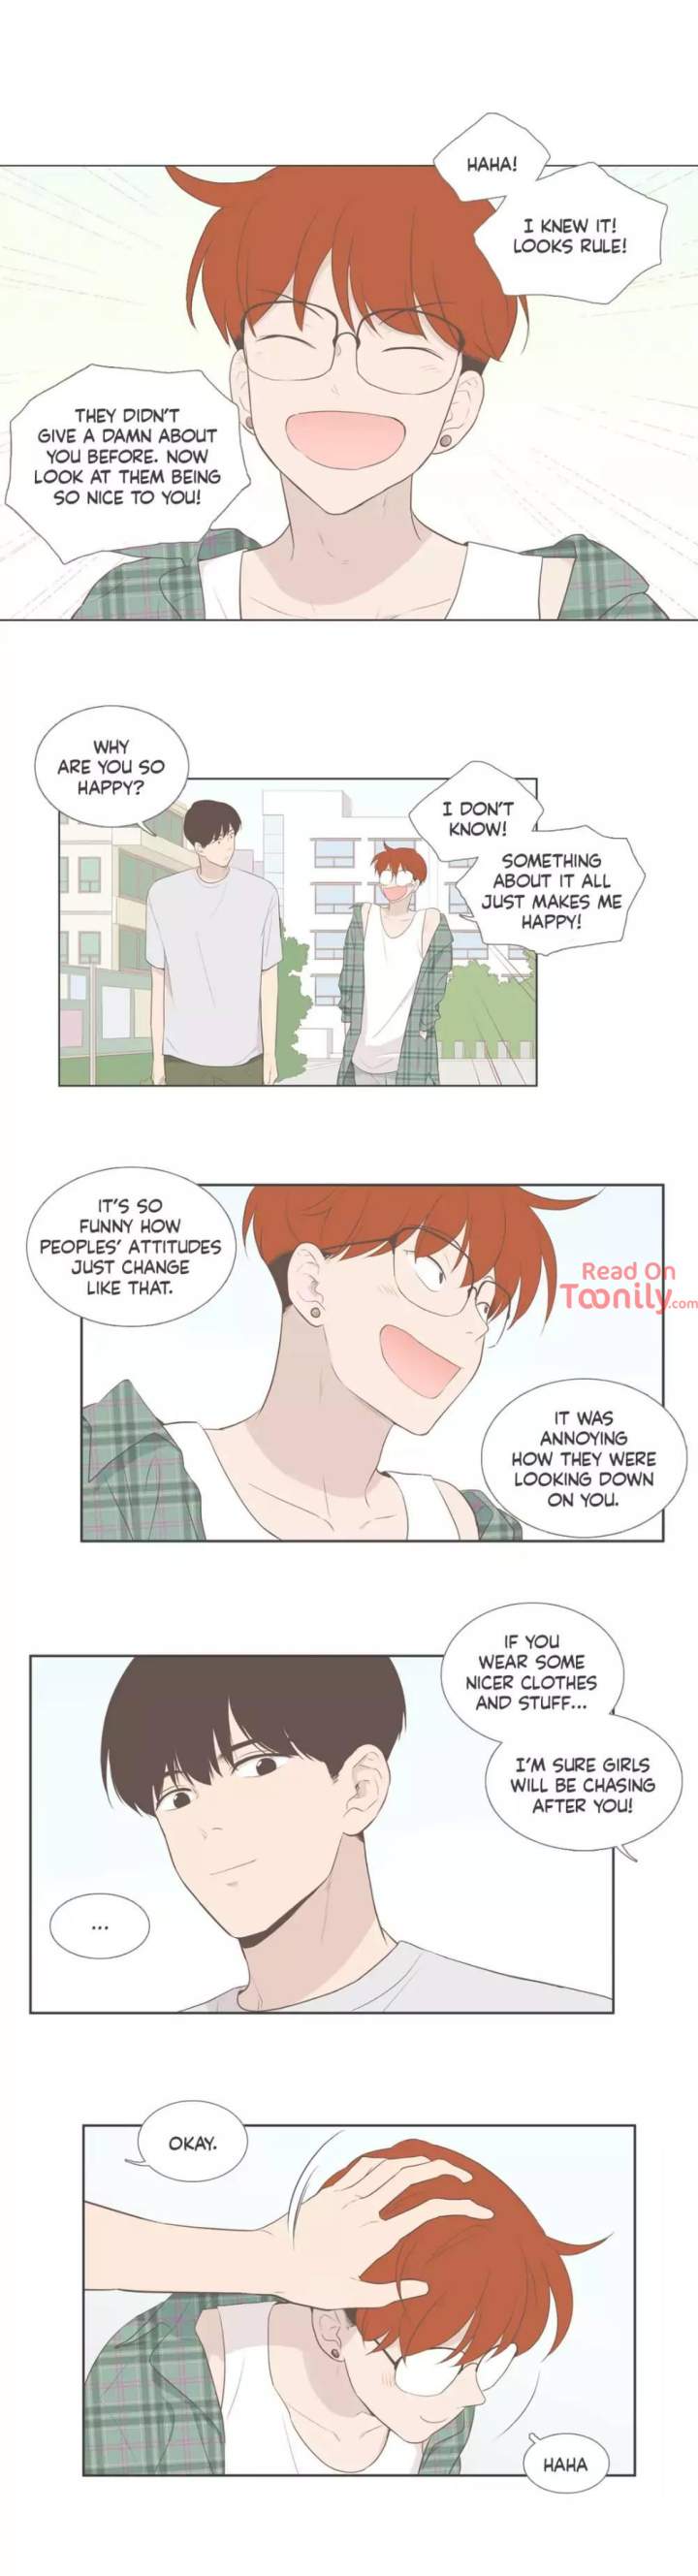 Something About Us - Chapter 101 Page 11